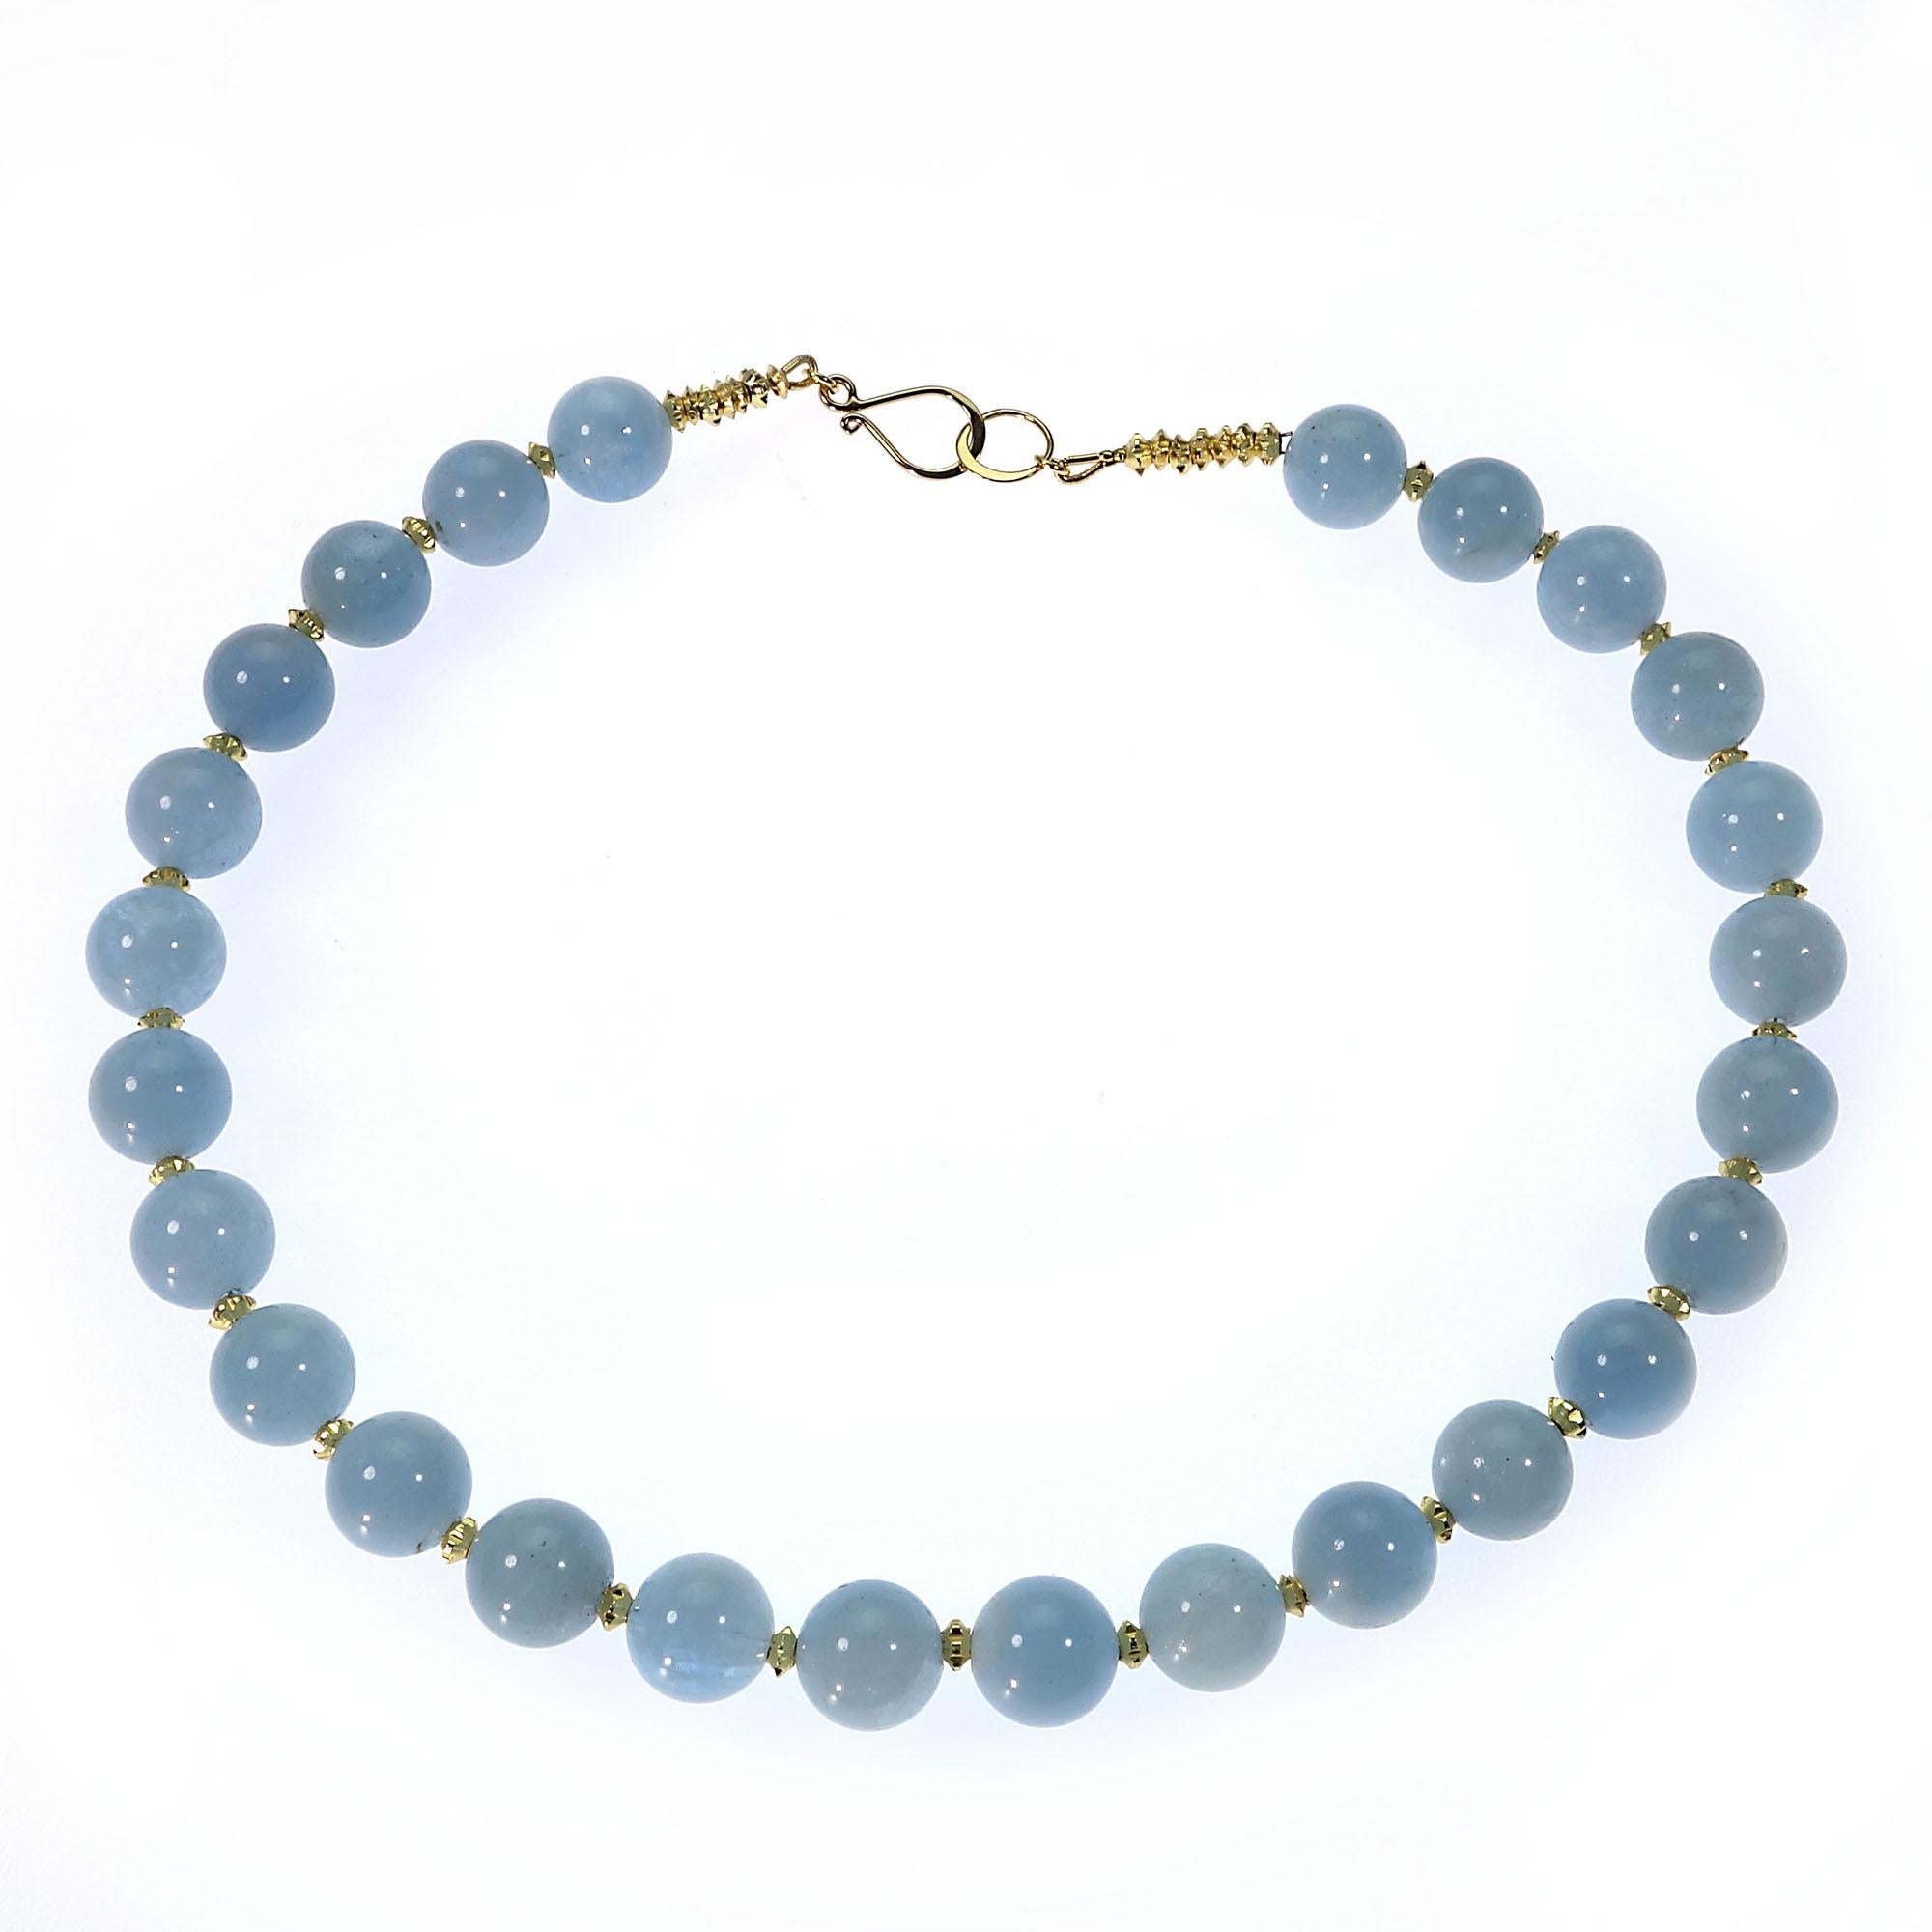 Women's or Men's Gemjunky Translucent Aquamarine Choker Necklace with Gold Accents